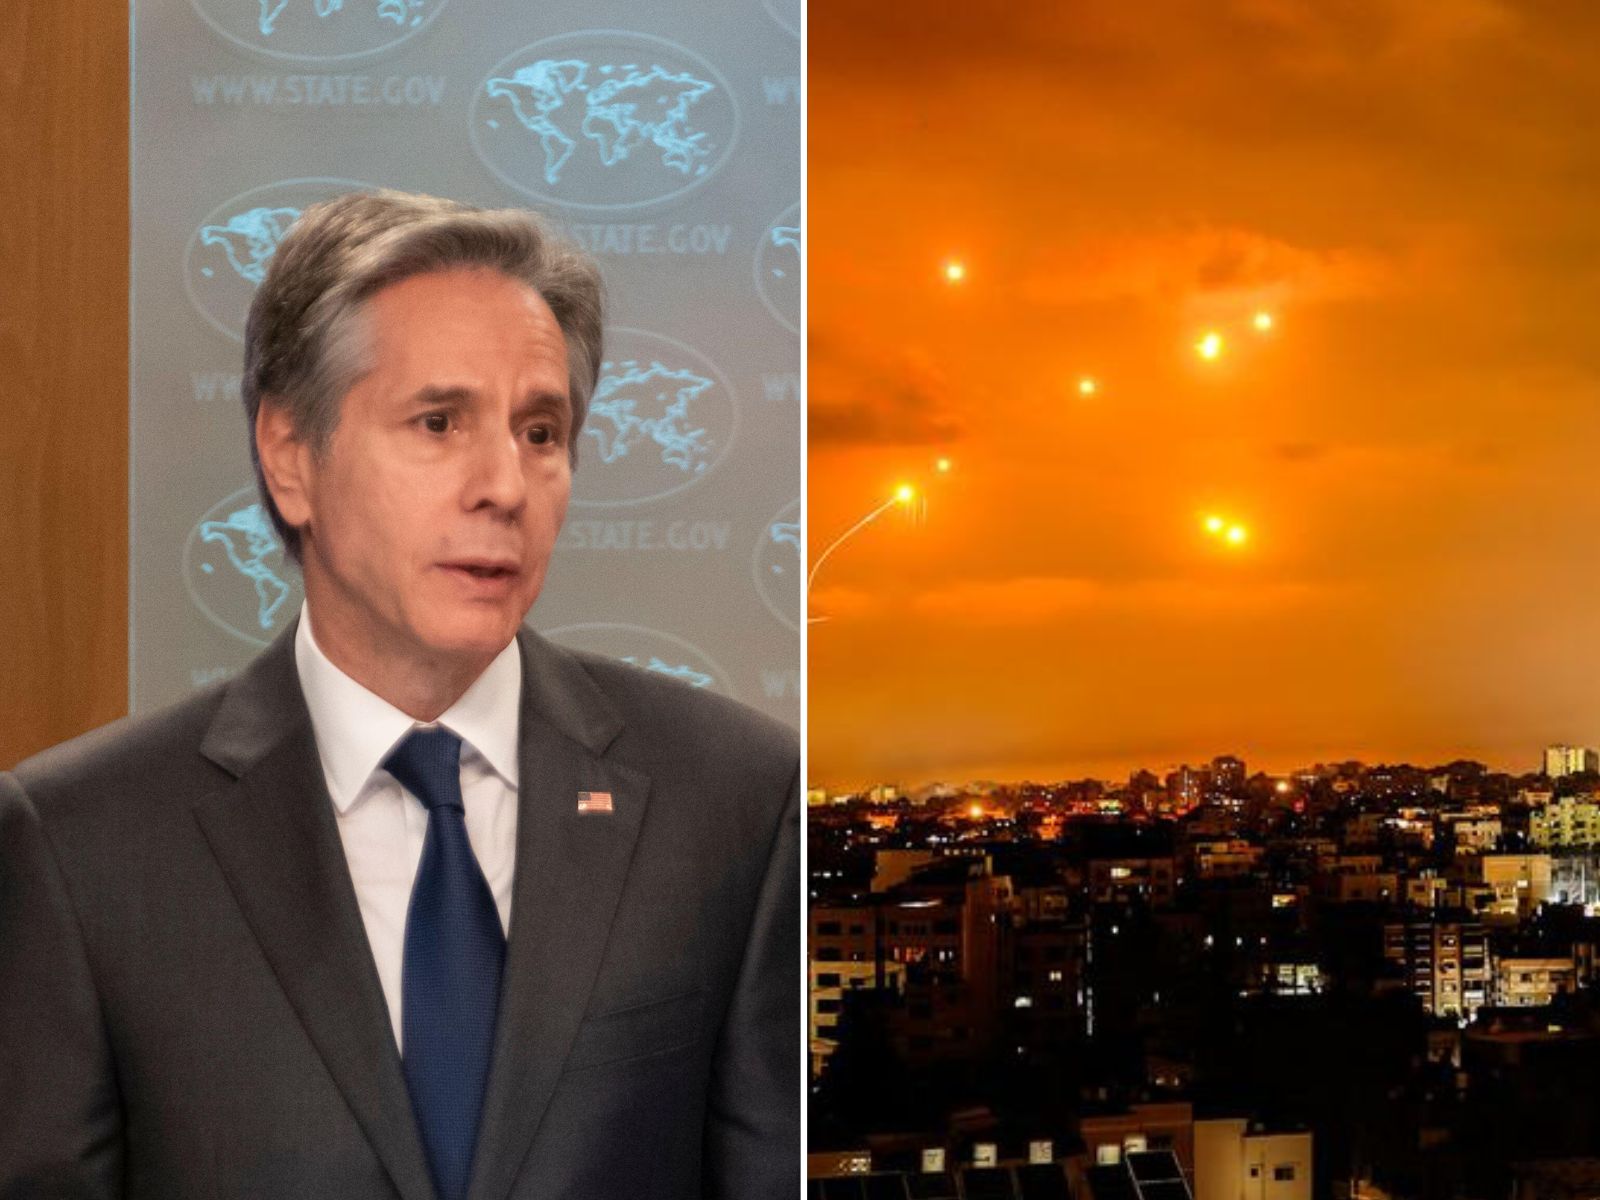 Split-screen shows US Secretary of State Antony Blinken at the US State Department on 2-3-22, and missile strikes through the night in Gaza on 2-11-23